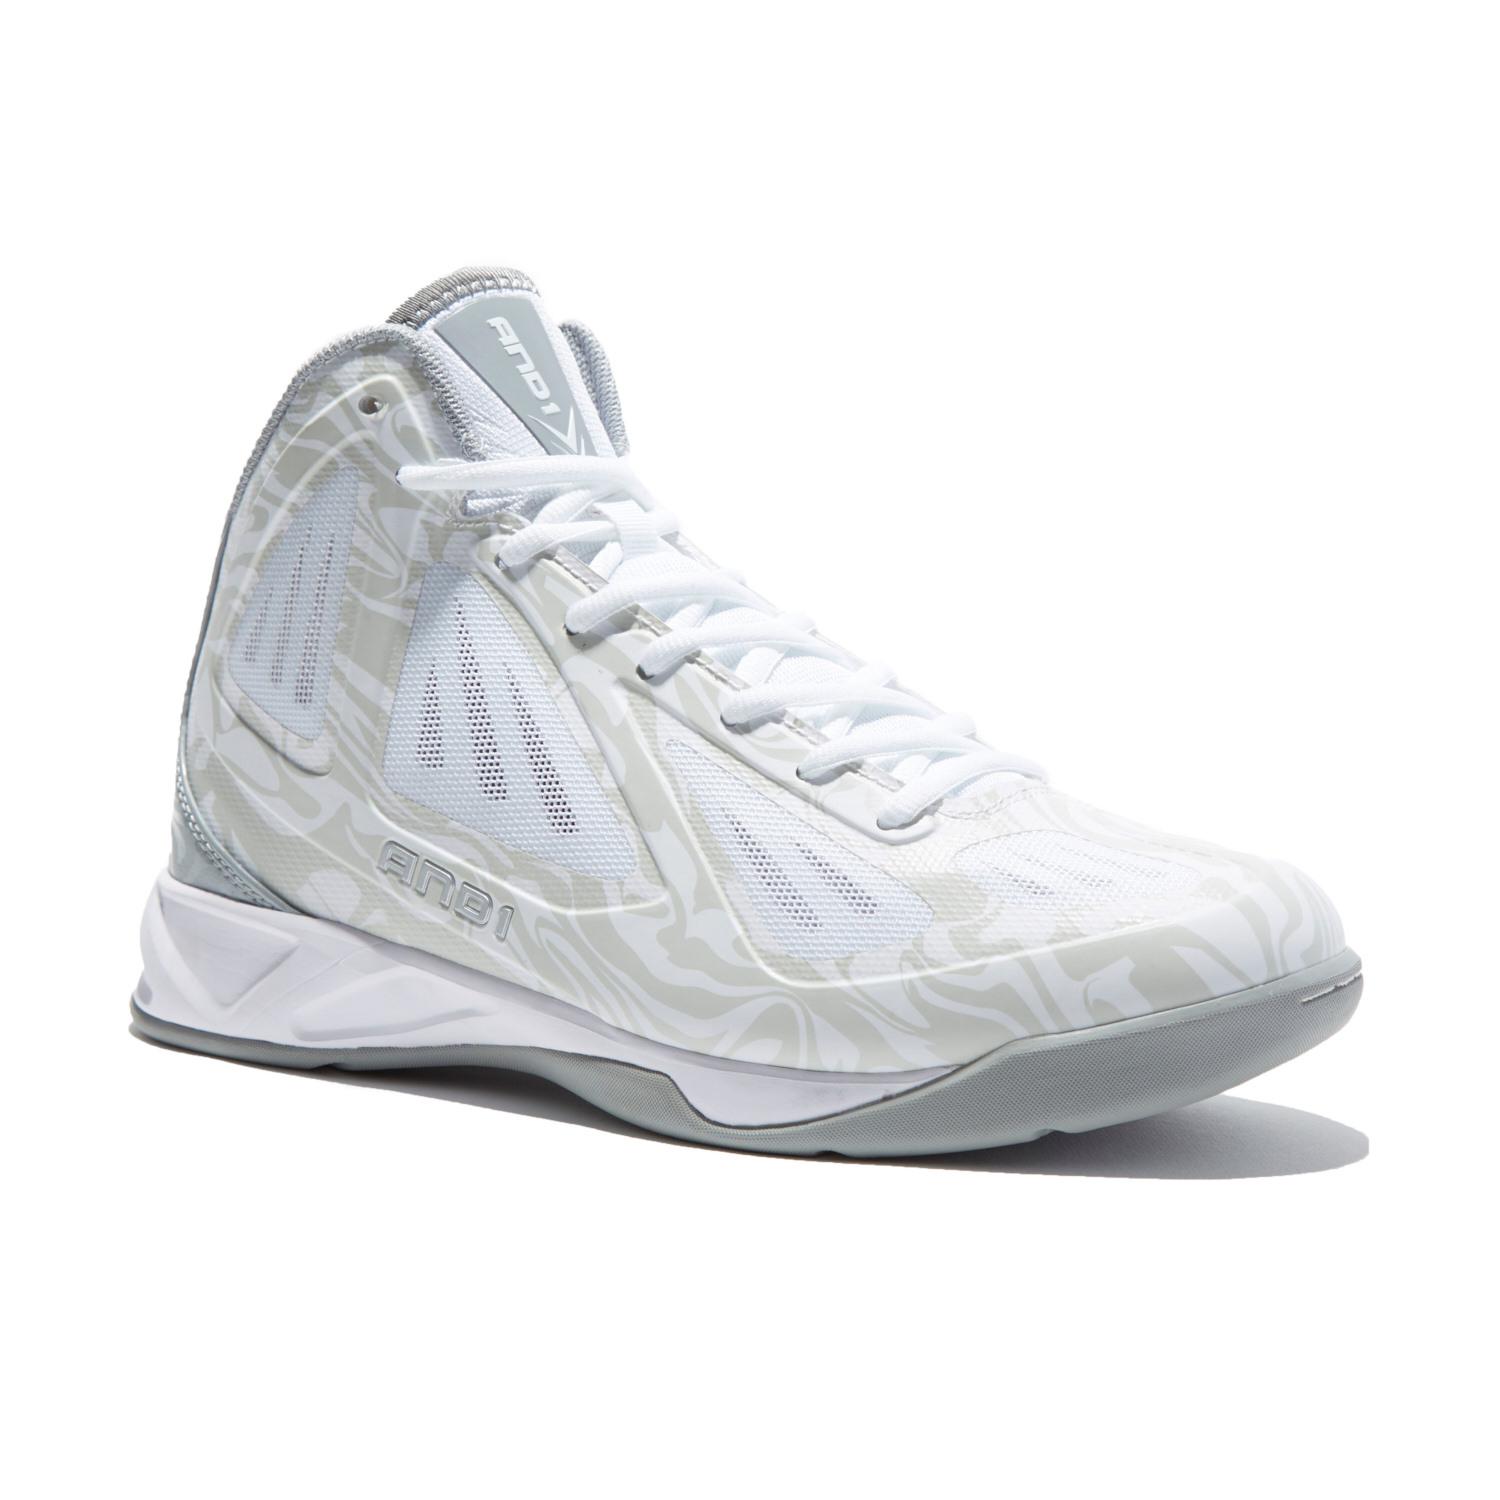 AND 1 Men's Xcelerate Athletic Shoe - White